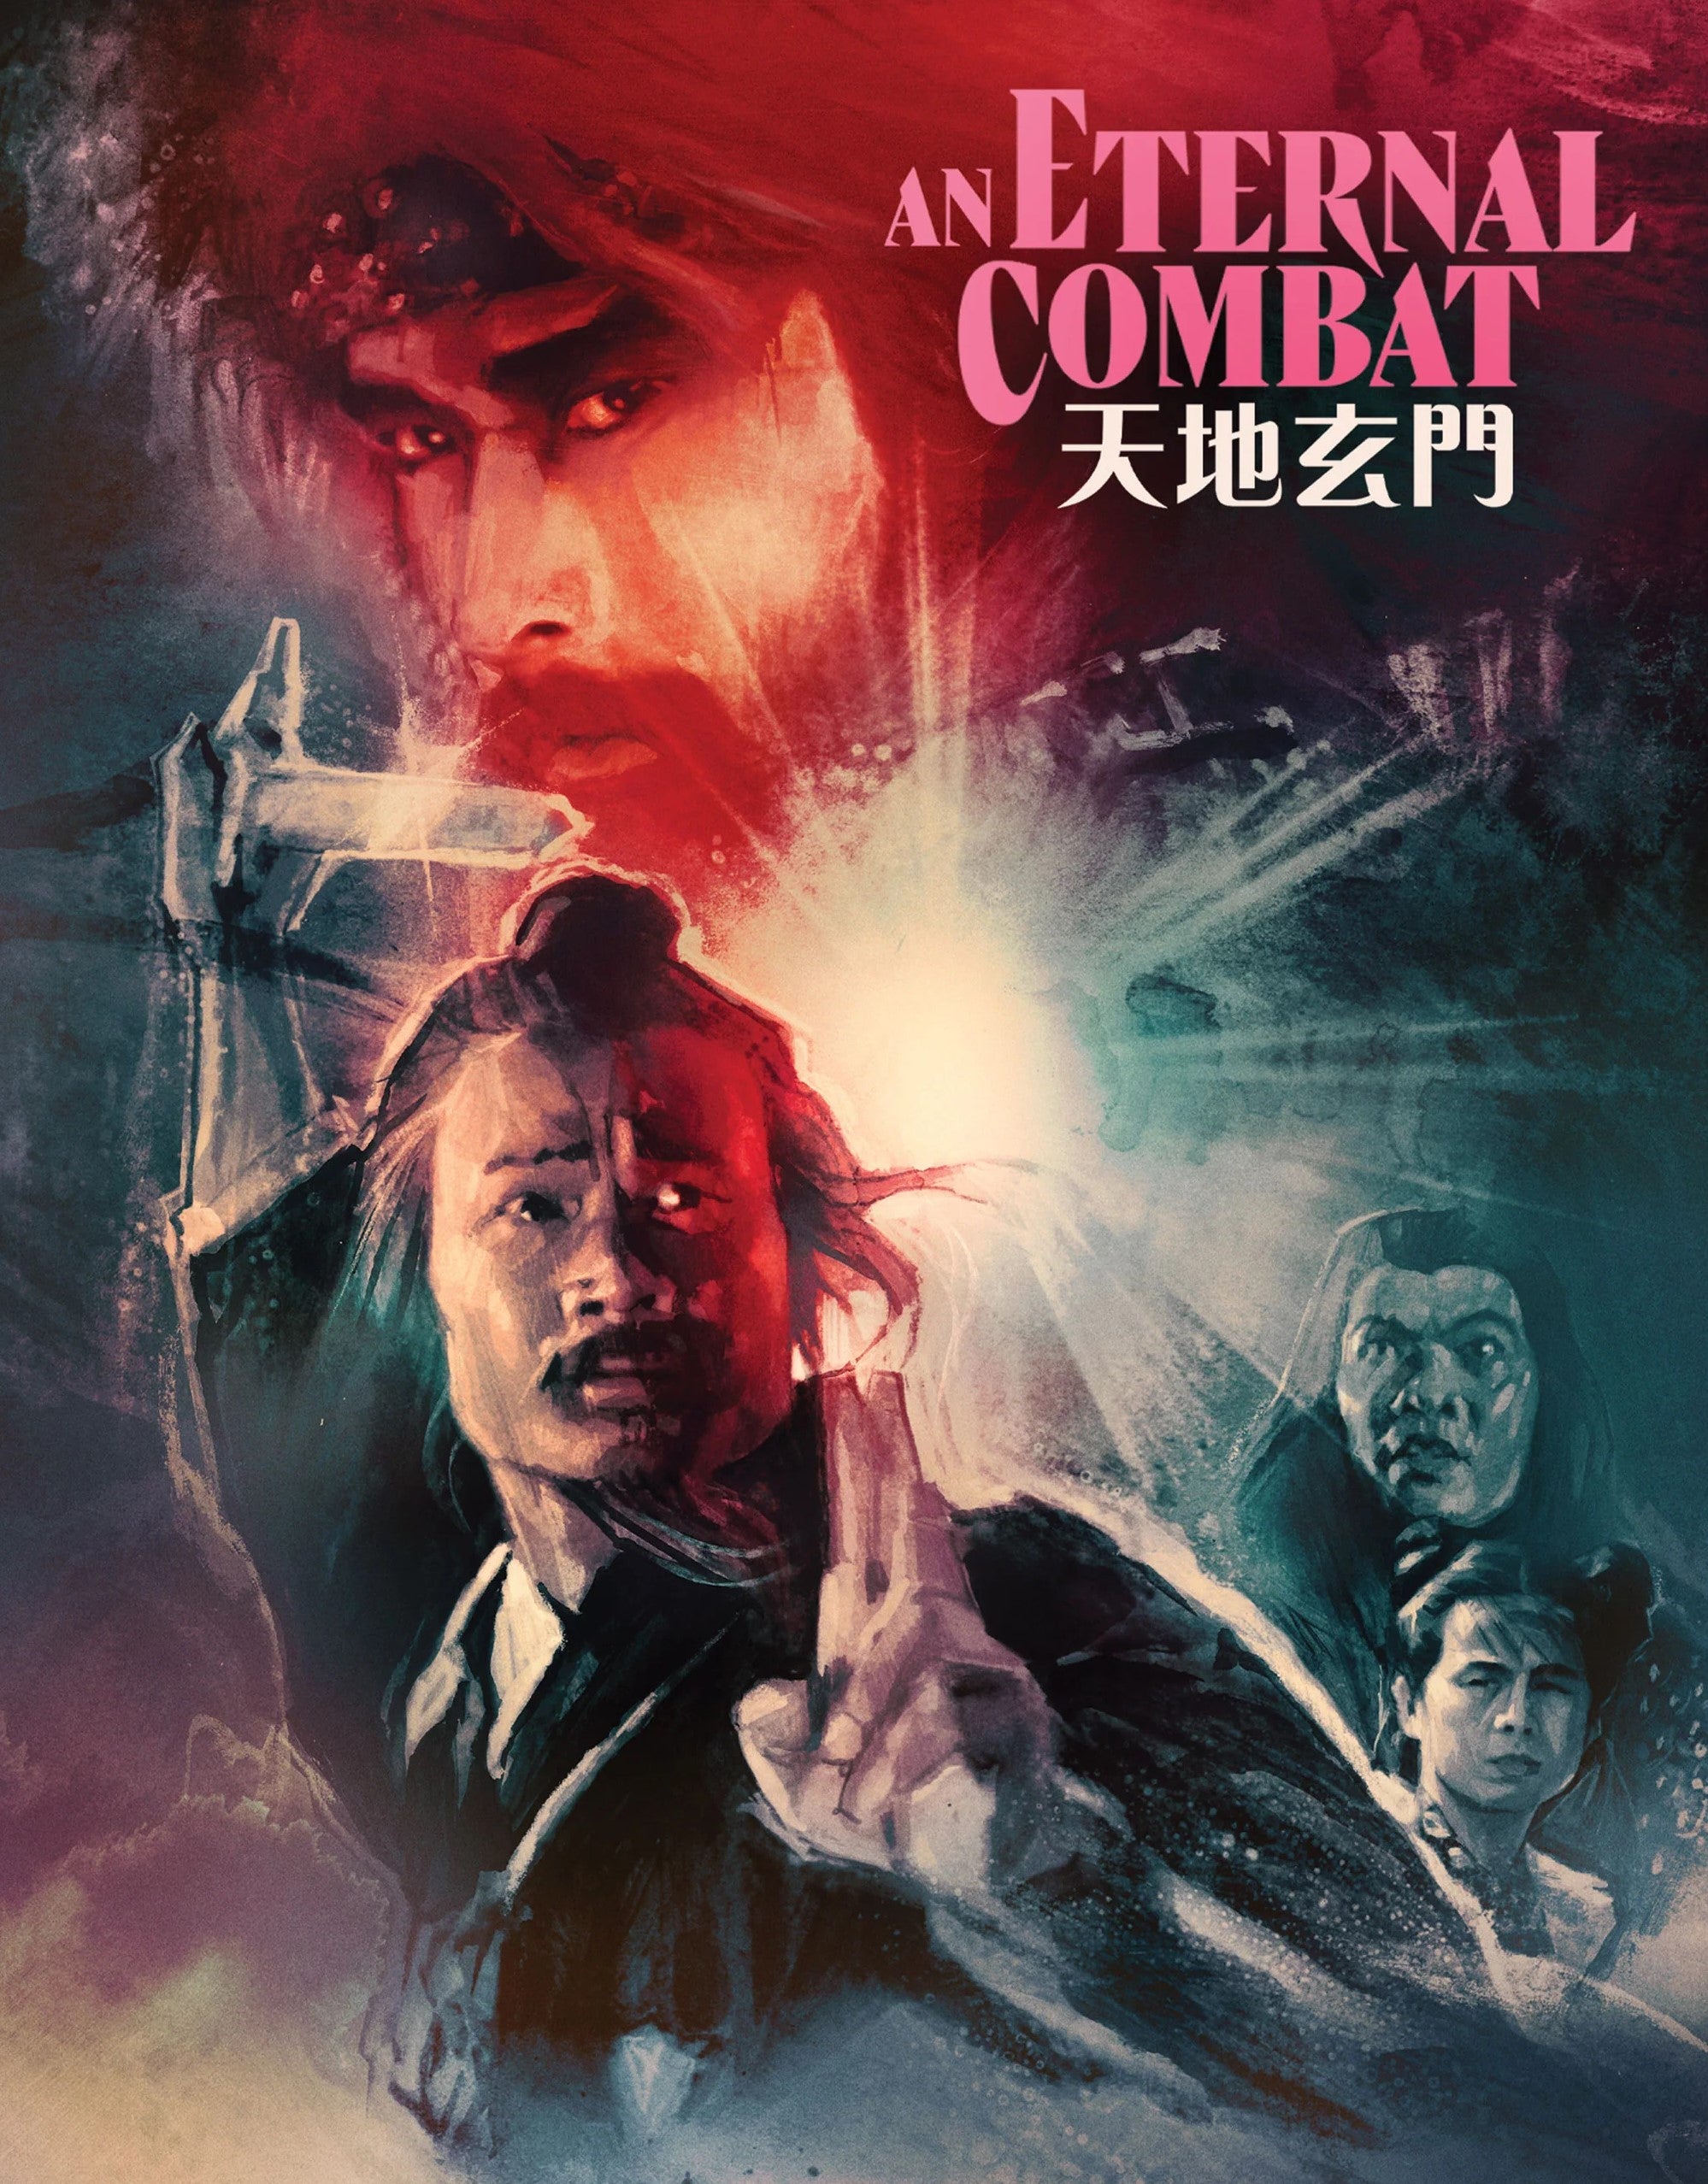 AN ETERNAL COMBAT (LIMITED EDITION) BLU-RAY